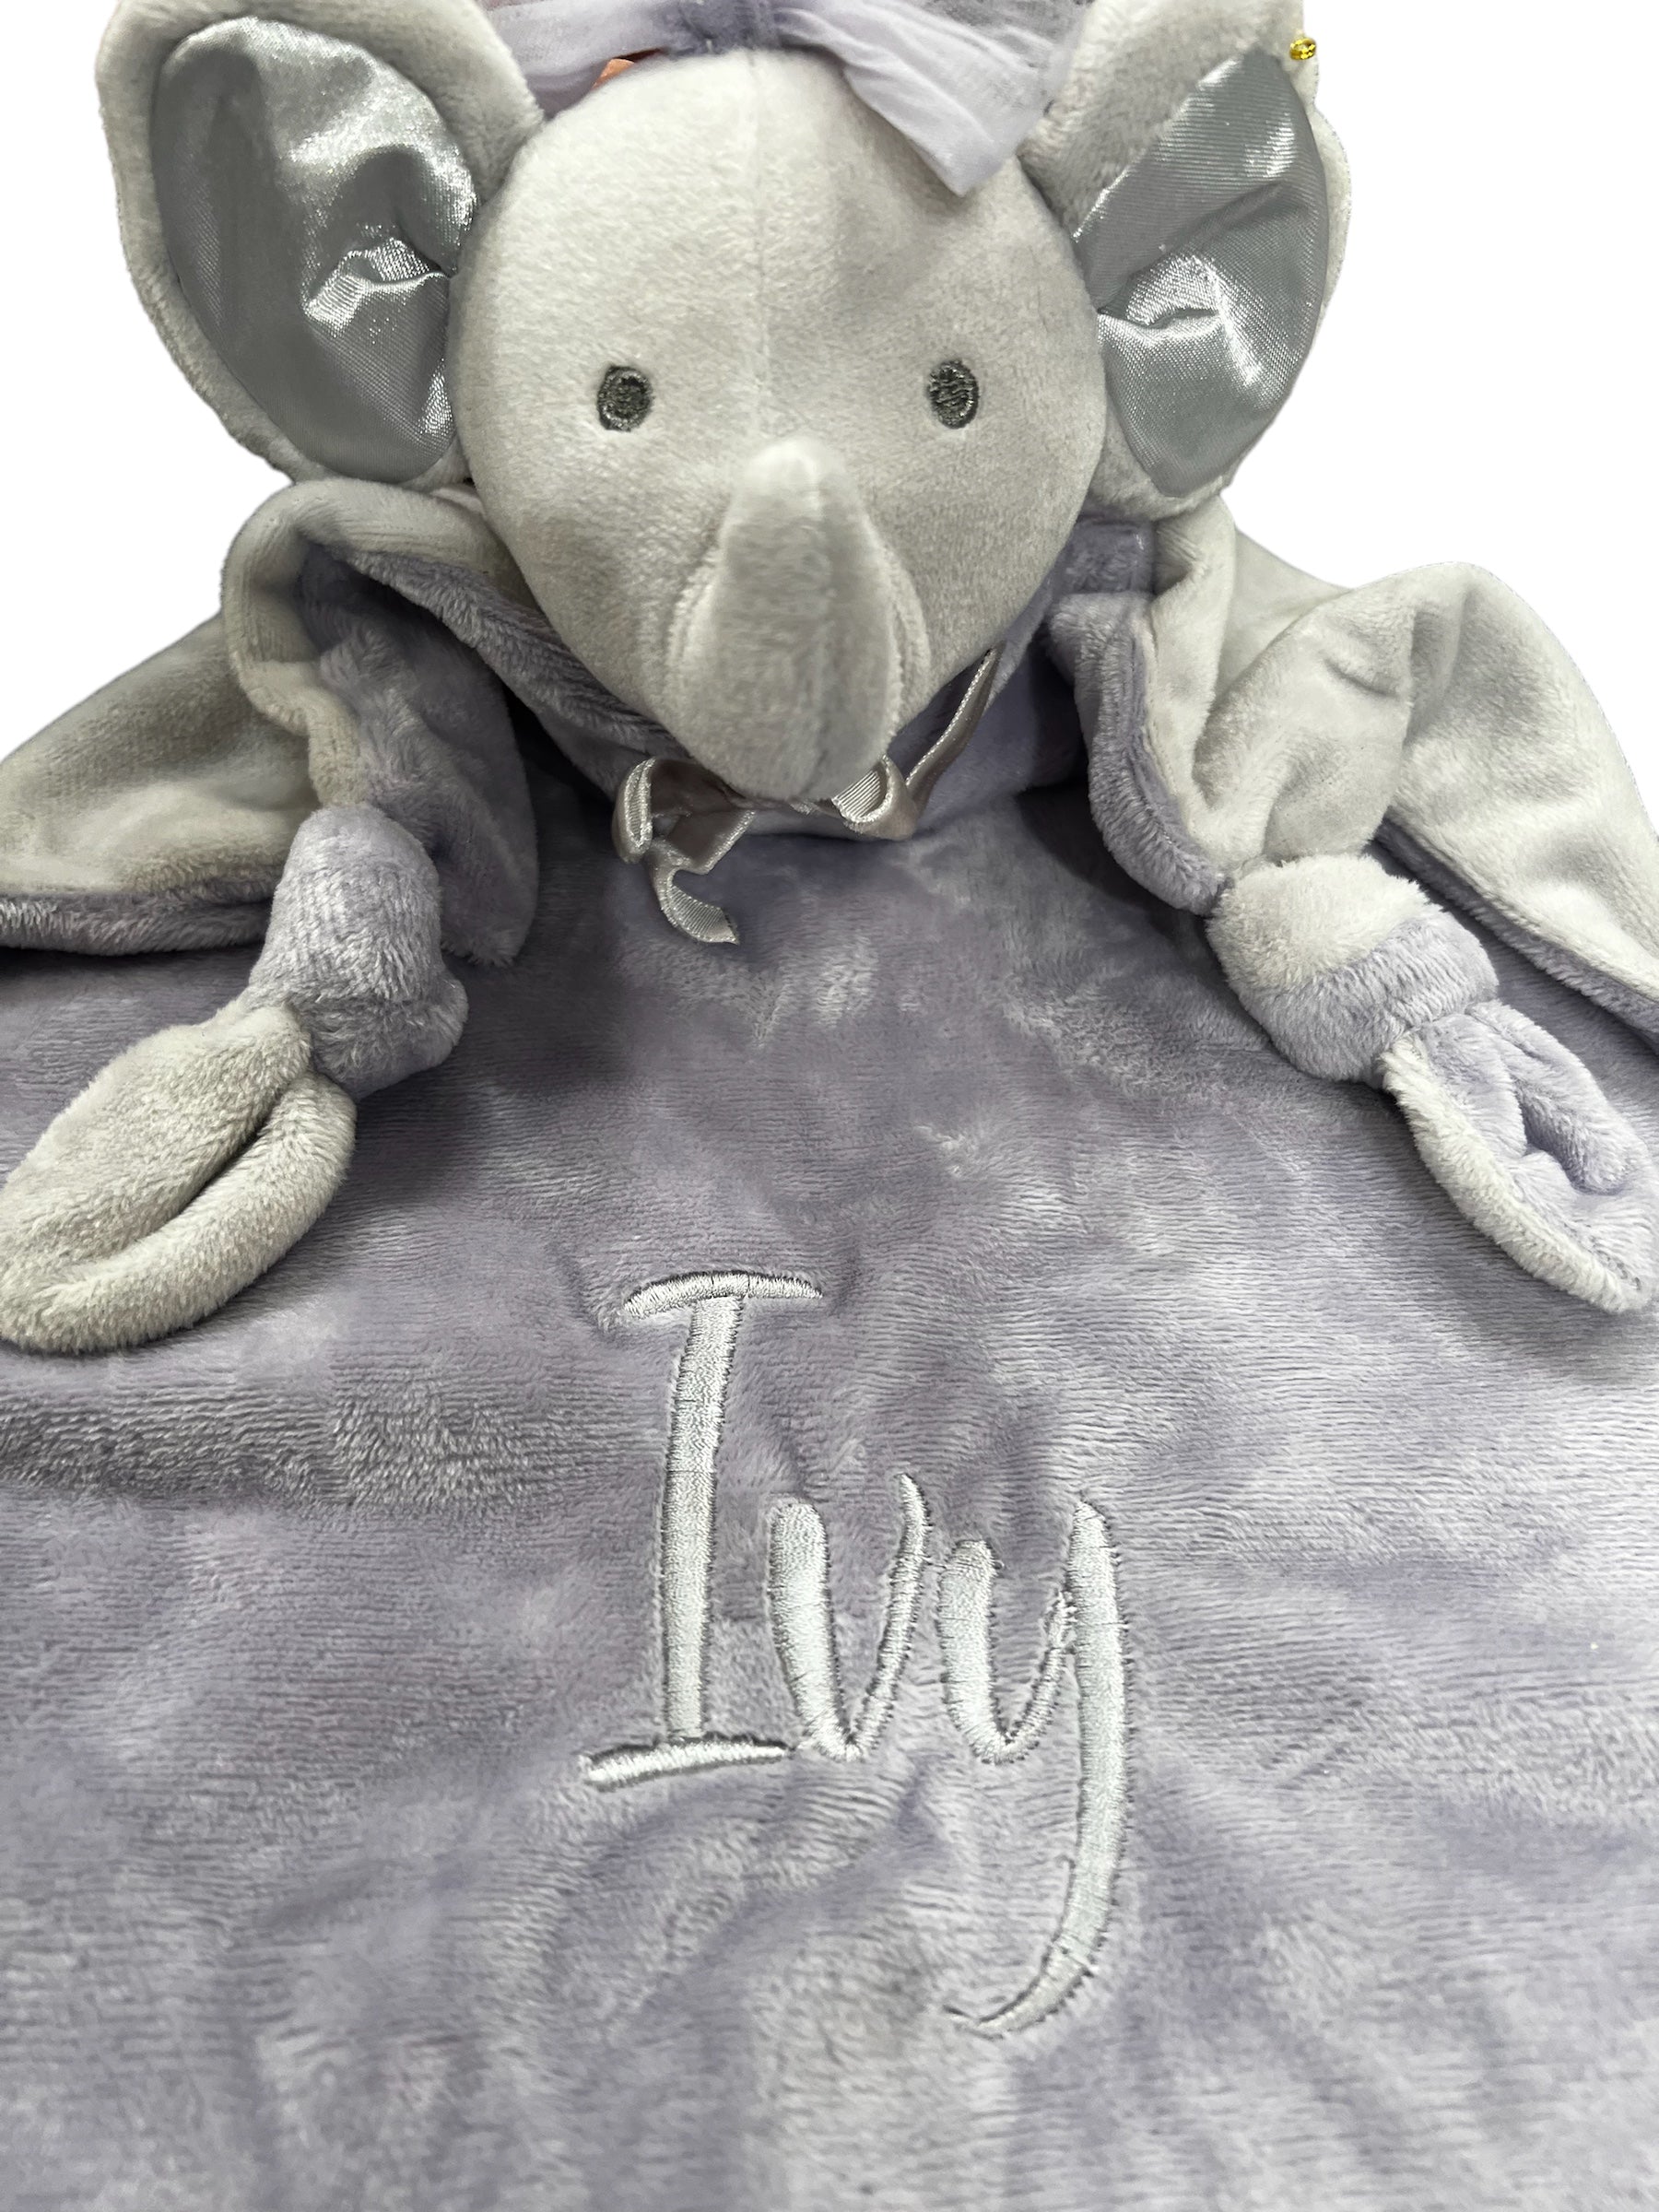 Personalized Baby Lovey - Lilac Elephant